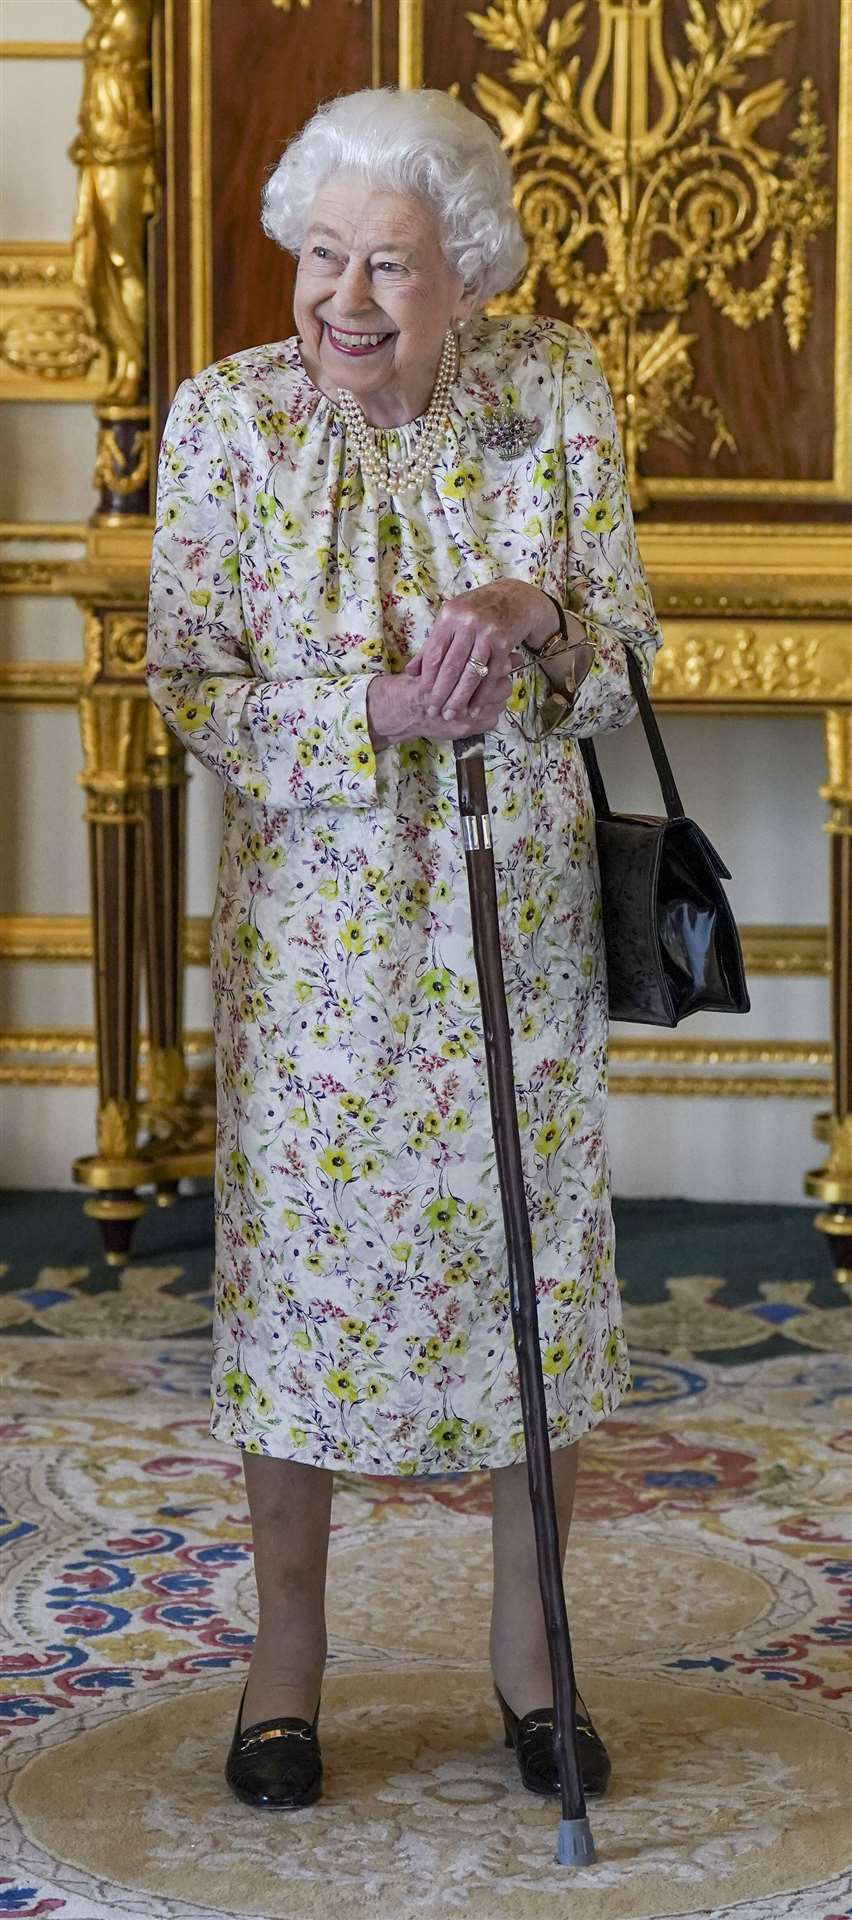 The Queen has taken to using a walking stick because of ongoing mobility difficulties (Steve Parsons/PA)